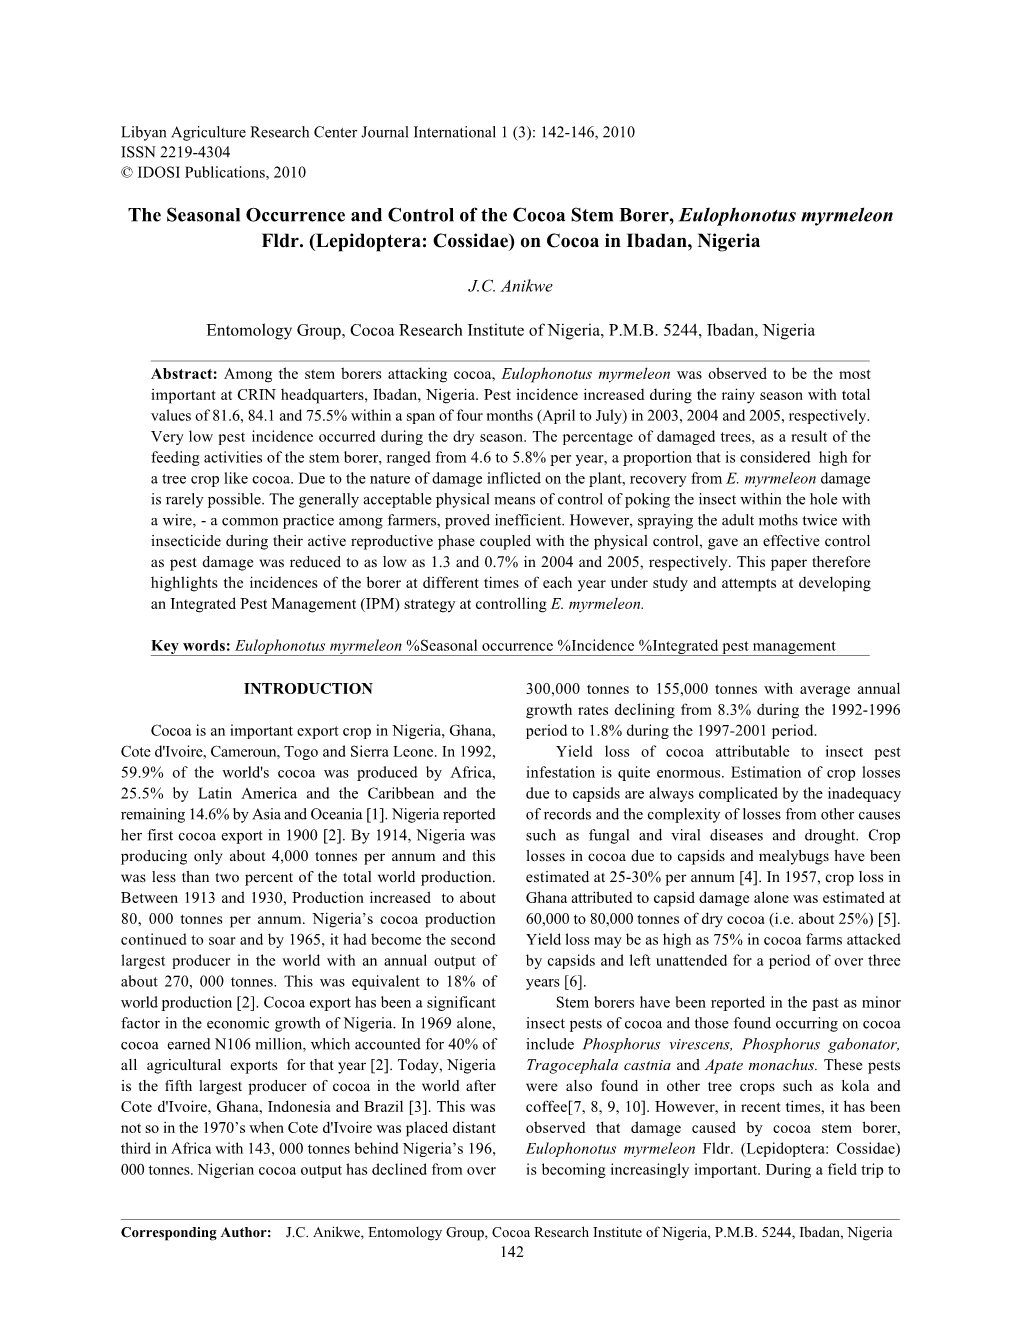 Prevalence and Management of the Cocoa Stem Borer, Eulophonotus